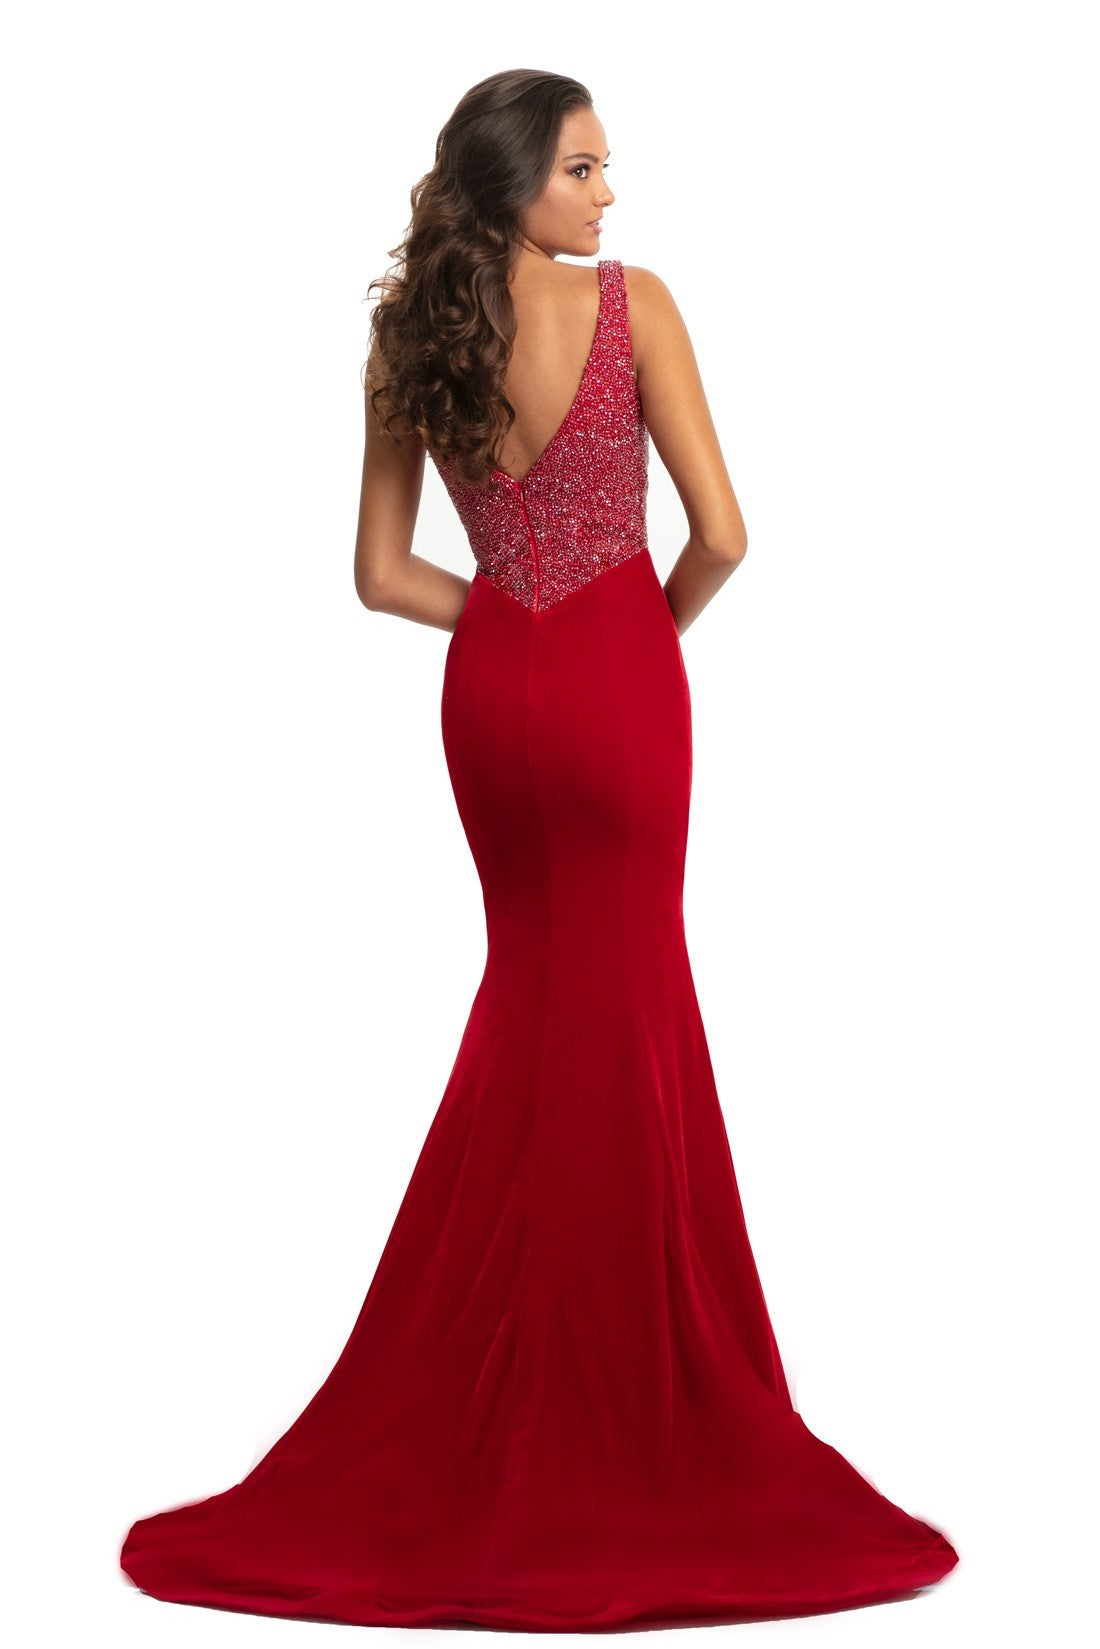 Johnathan Kayne 9019 is a velvet mermaid Prom Dress Pageant Gown & Formal Evening Wear. Long fitted mermaid silhouette with a basque waistline. Fully Embellished bodice is covered in crystal studs and beading. Plunging neckline with mesh insert.